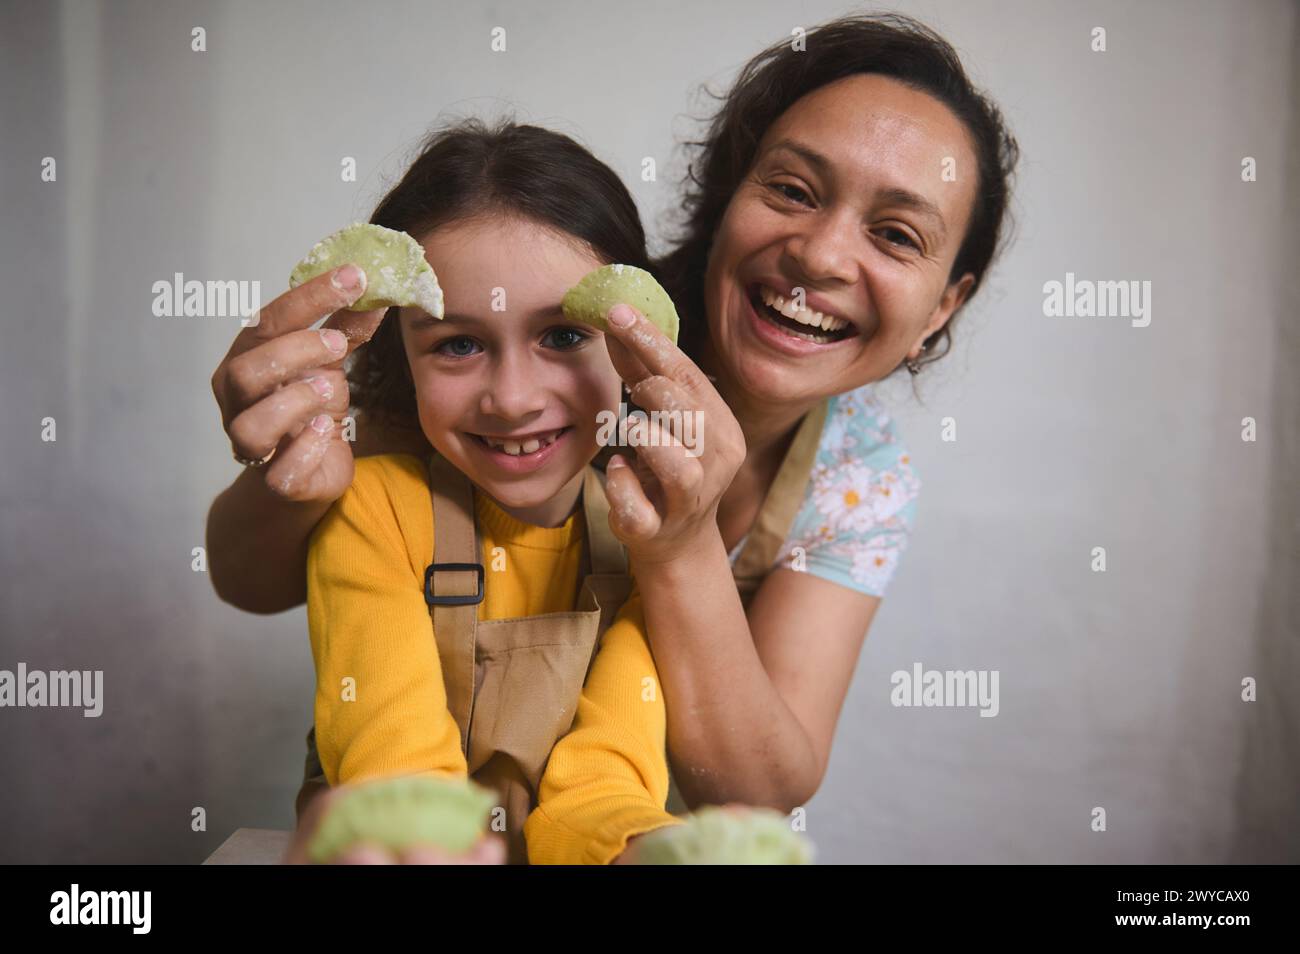 Close-up portrait of a mother and daughter having fun, smiling looking at camera, holding molded dumplings in the home kitchen. Mother and daughter co Stock Photo